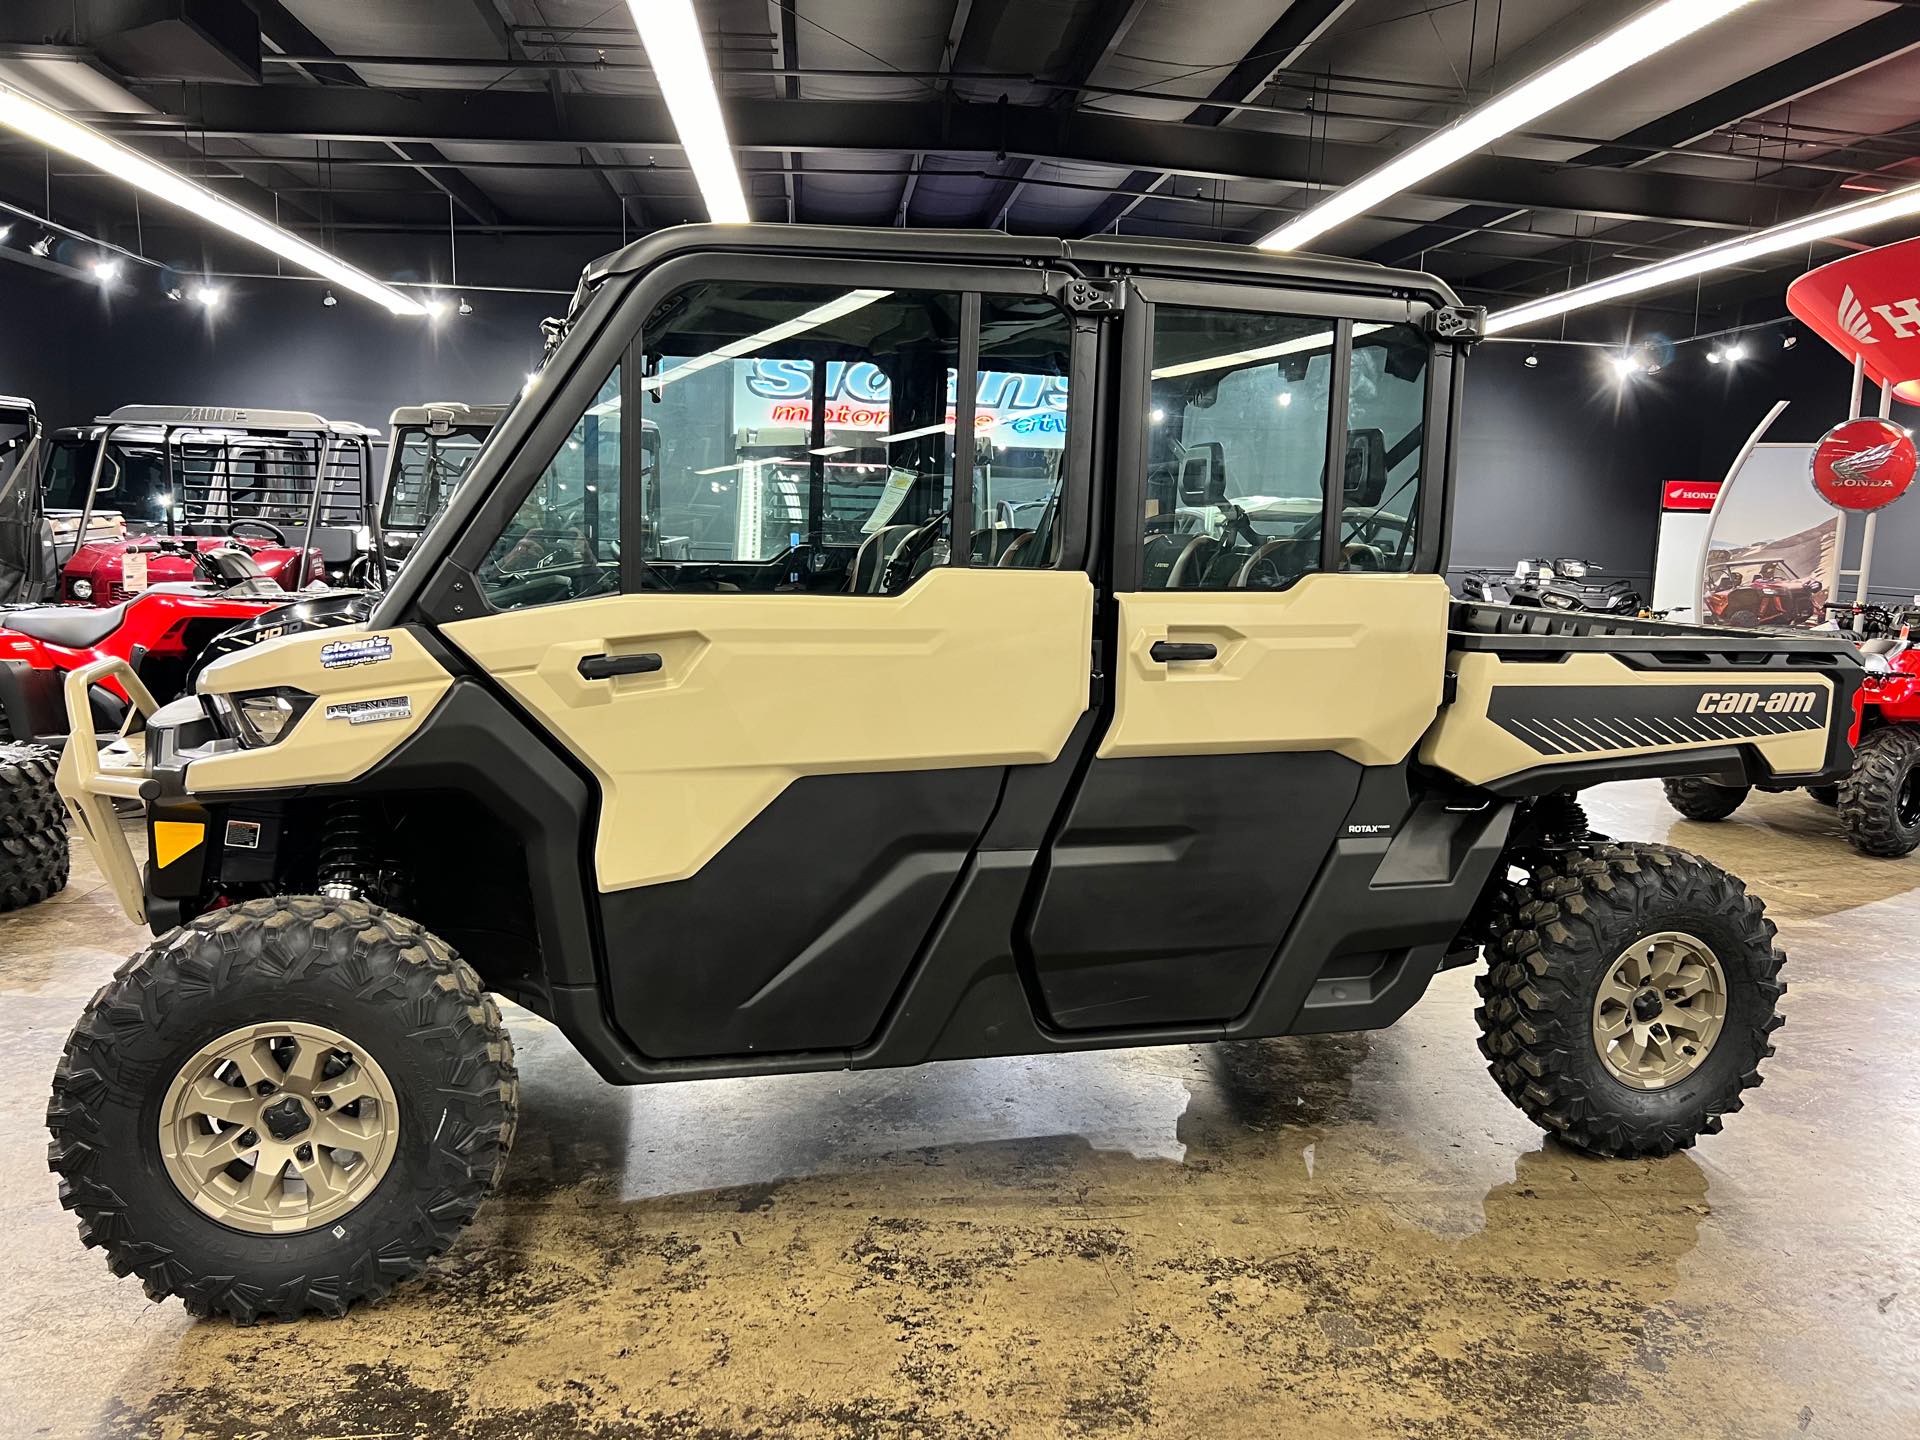 2023 Can-Am Defender Max Limited in Tan and Black on Display at Showroom 